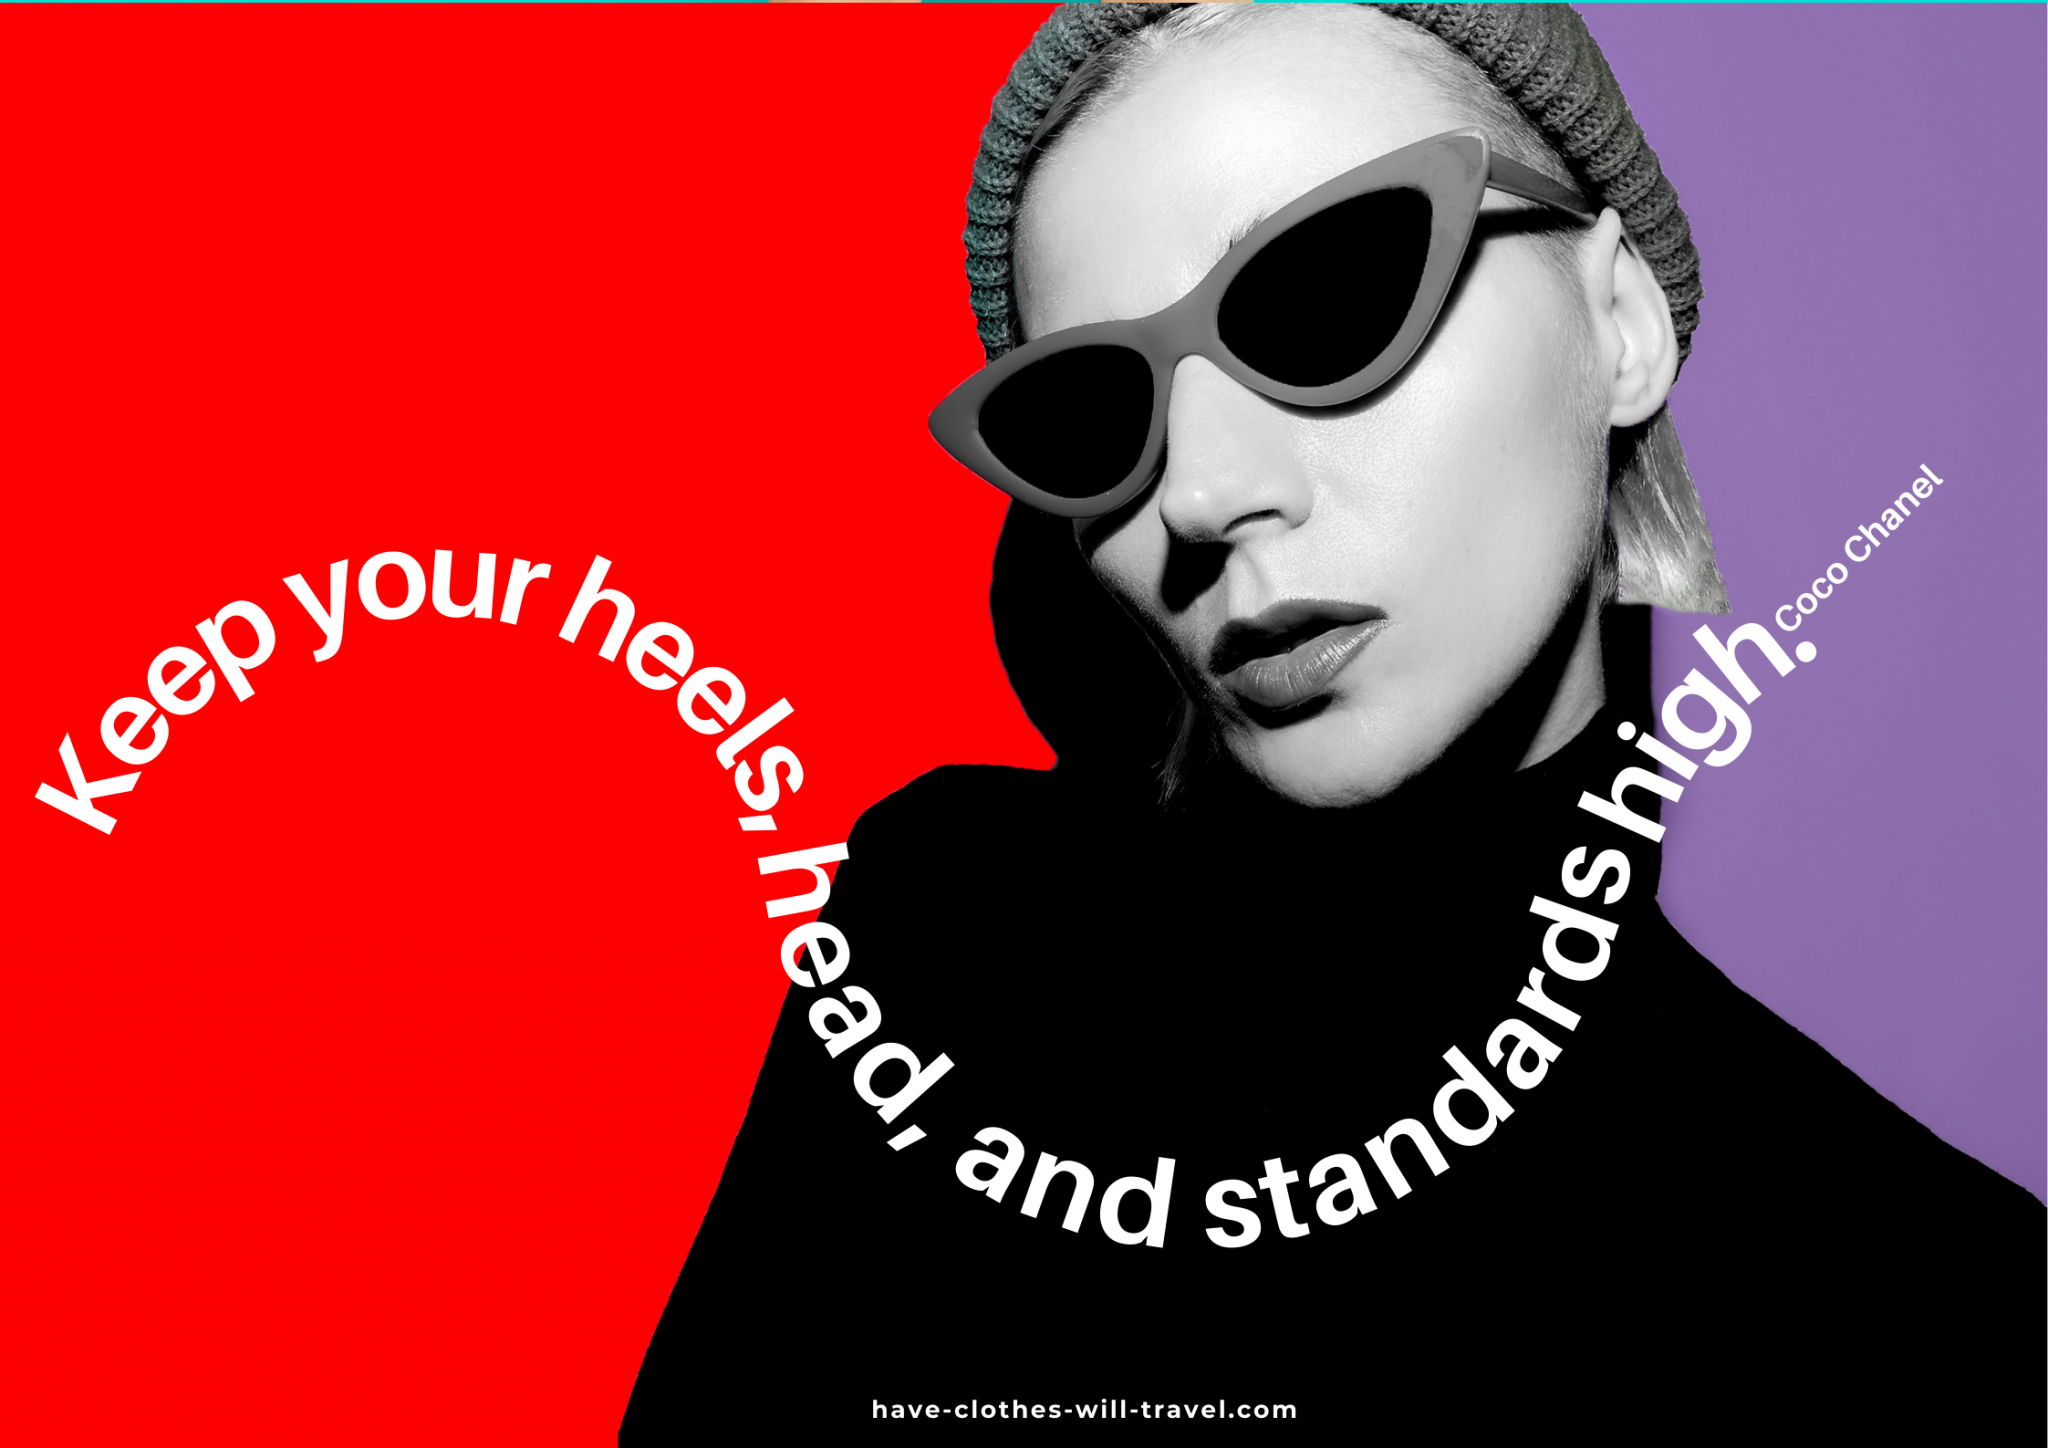 An edited color-block image shows a red and purple background and an image of a woman in black and white, posed wearing a hat and sunglasses. Text across the image says "Keep your heels, head, and standards high. - Coco Chanel"